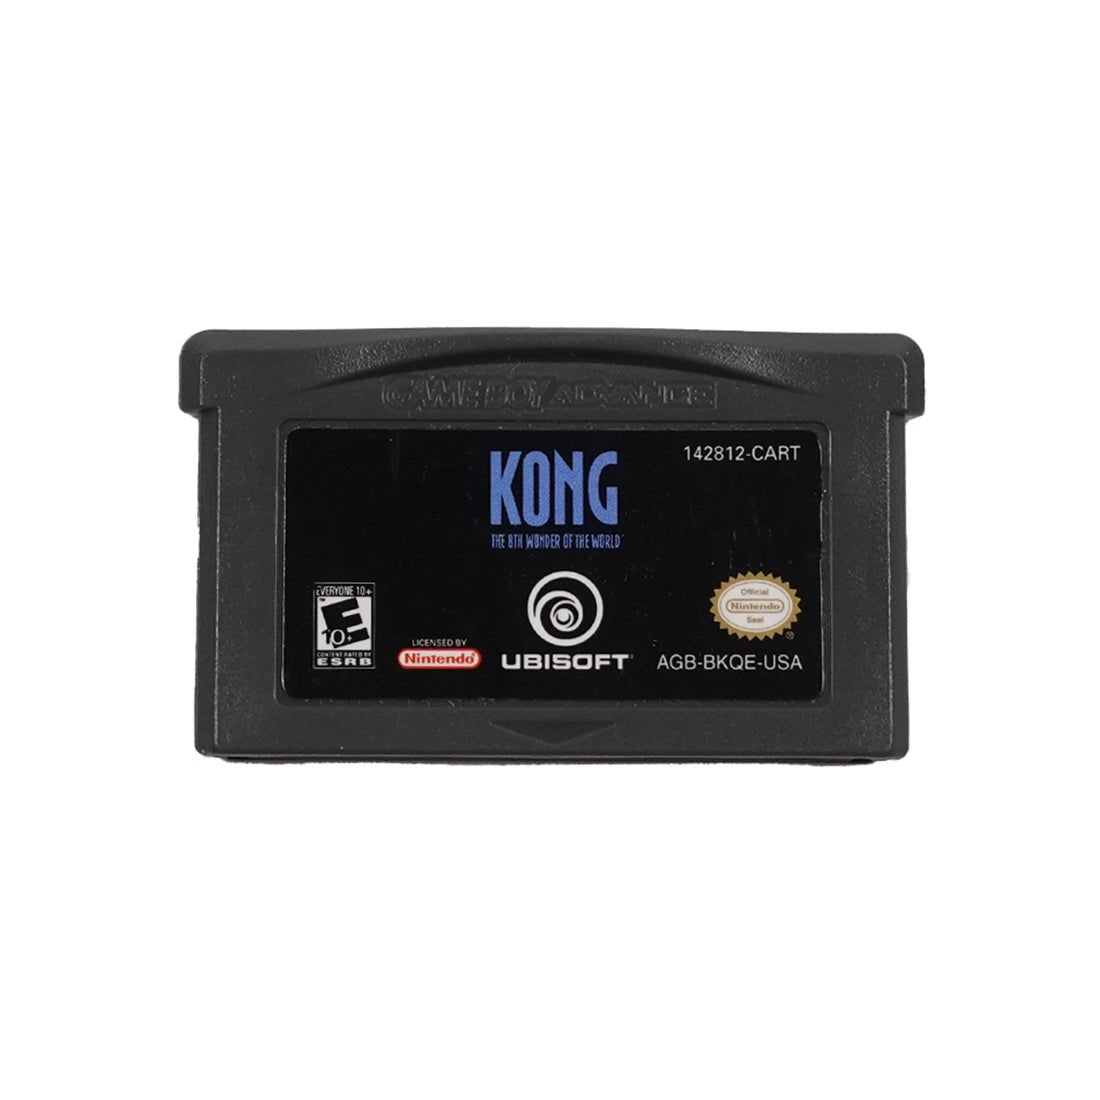 (Pre-Owned) Kong: the 8th Wonder of The world - Gameboy Advance - Store 974 | ستور ٩٧٤